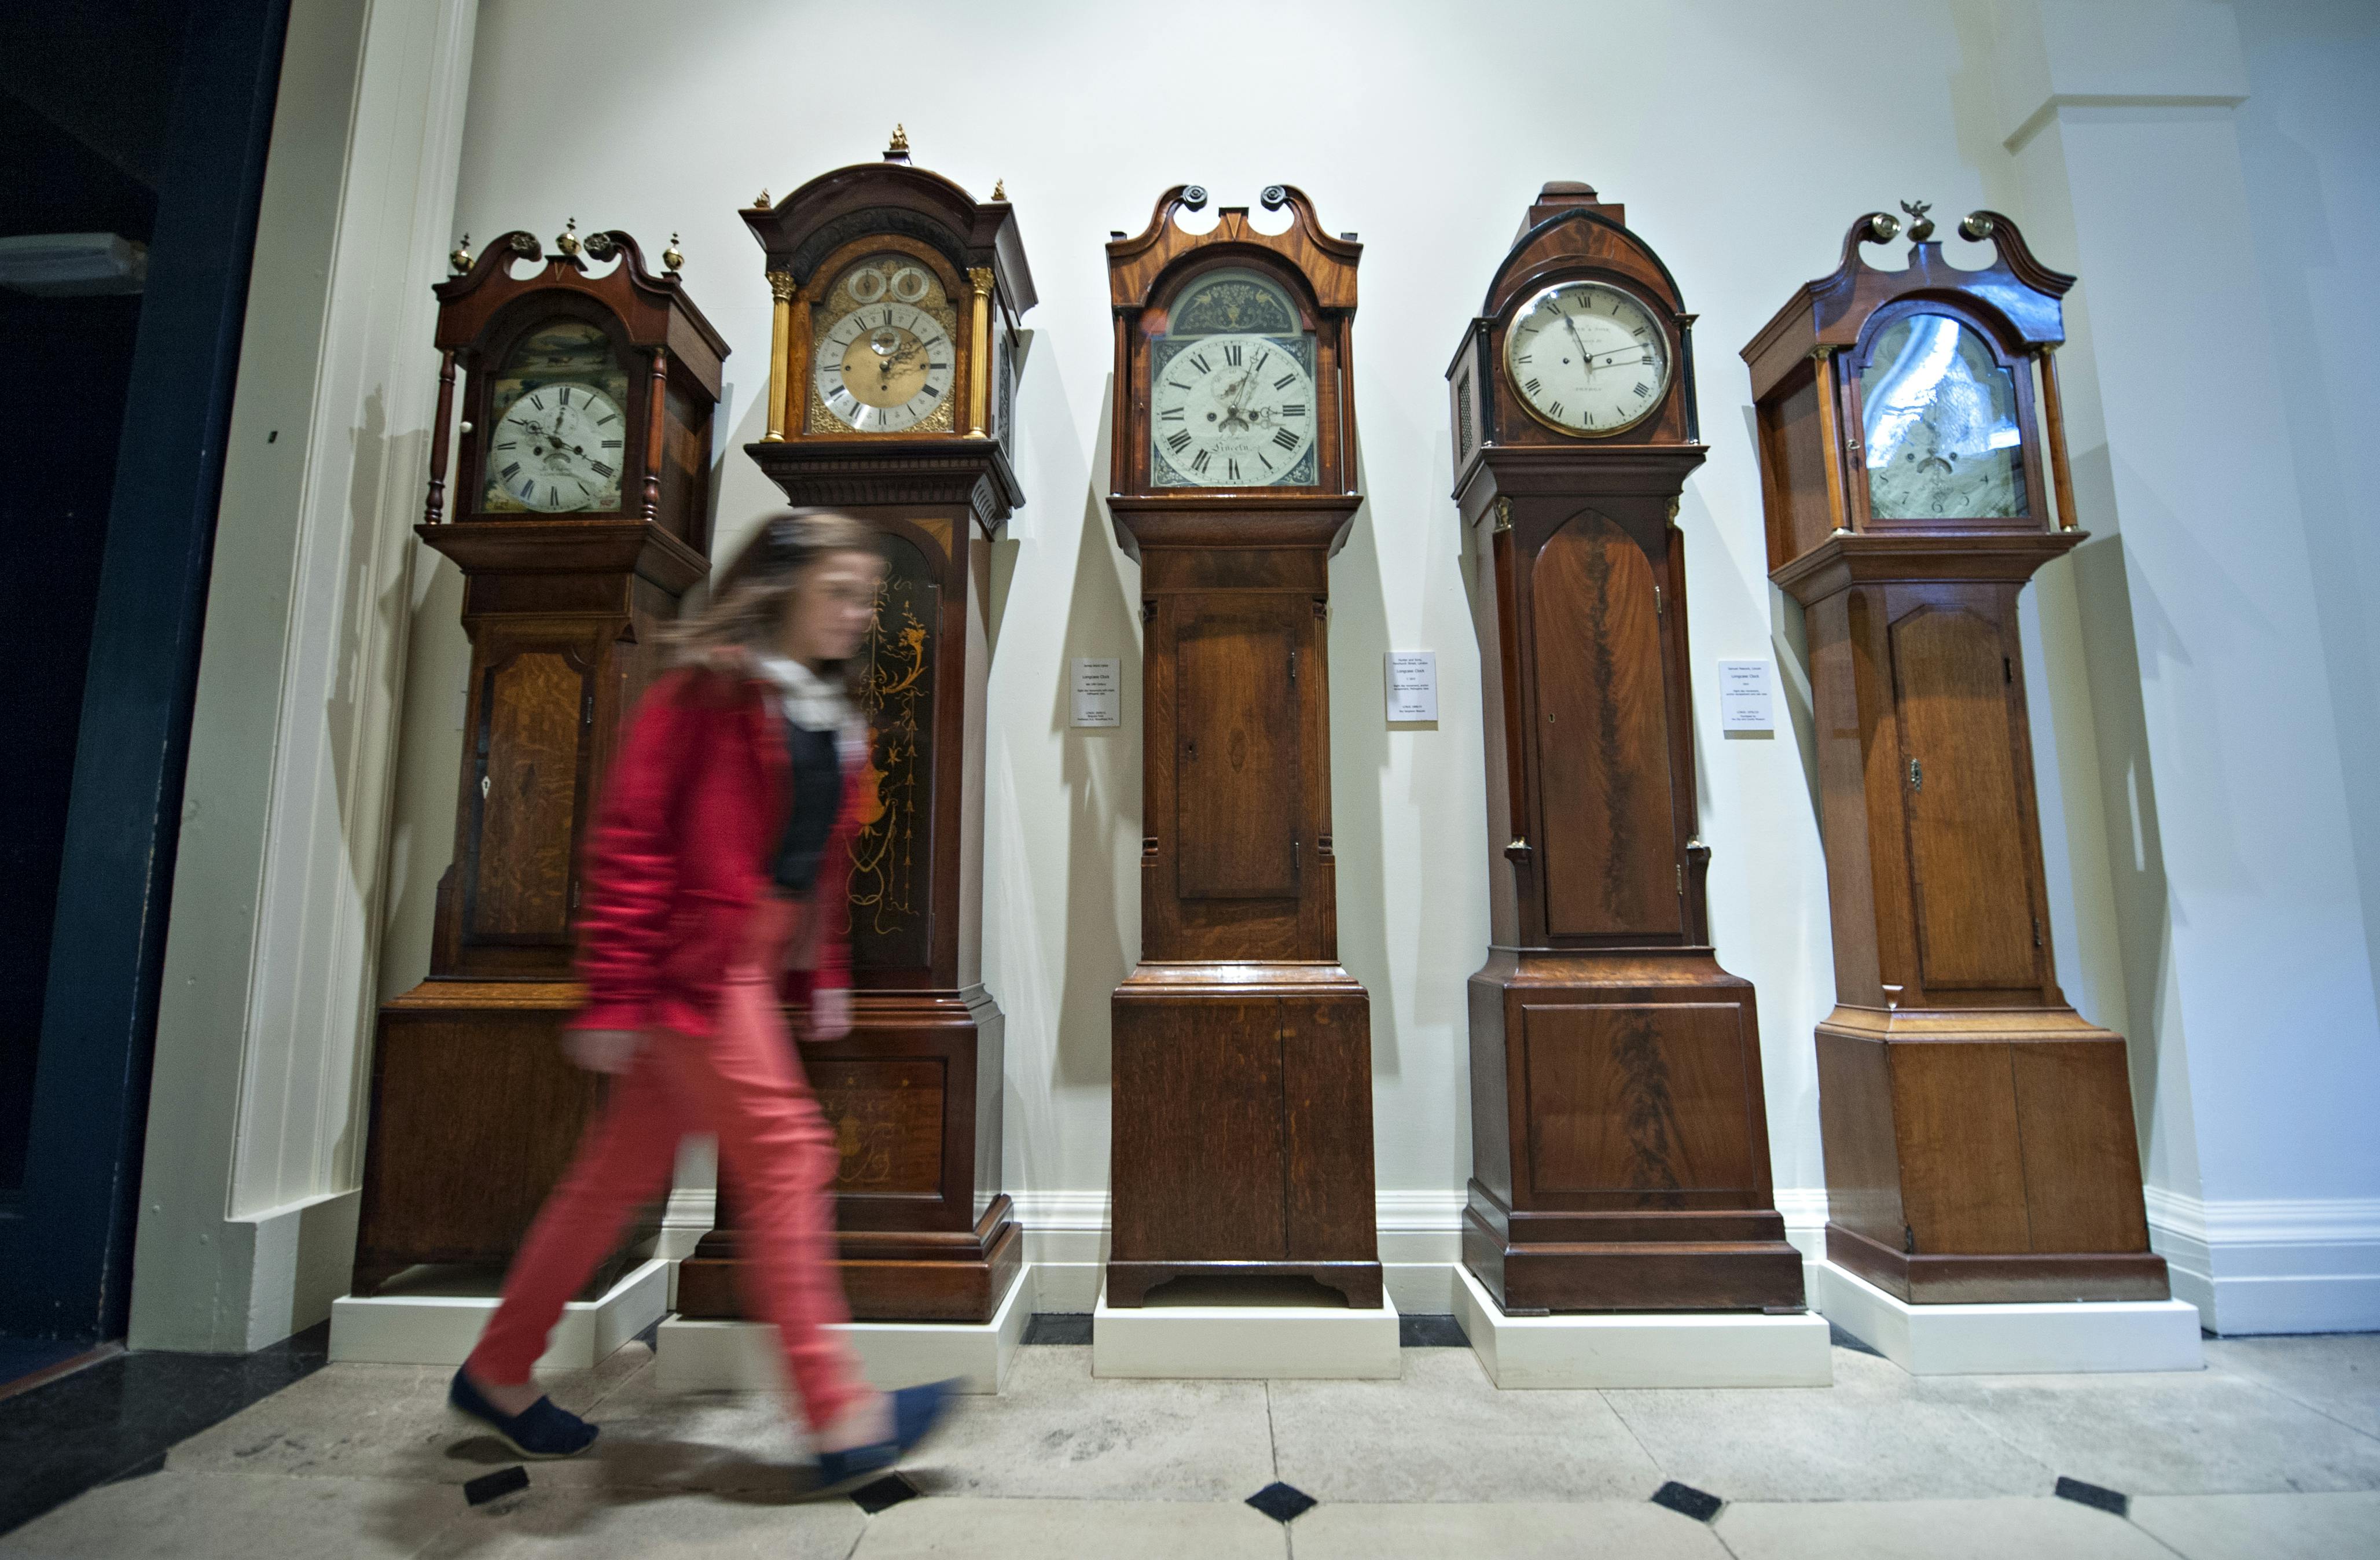 An image of the Longcase clocks with someone walking past them.